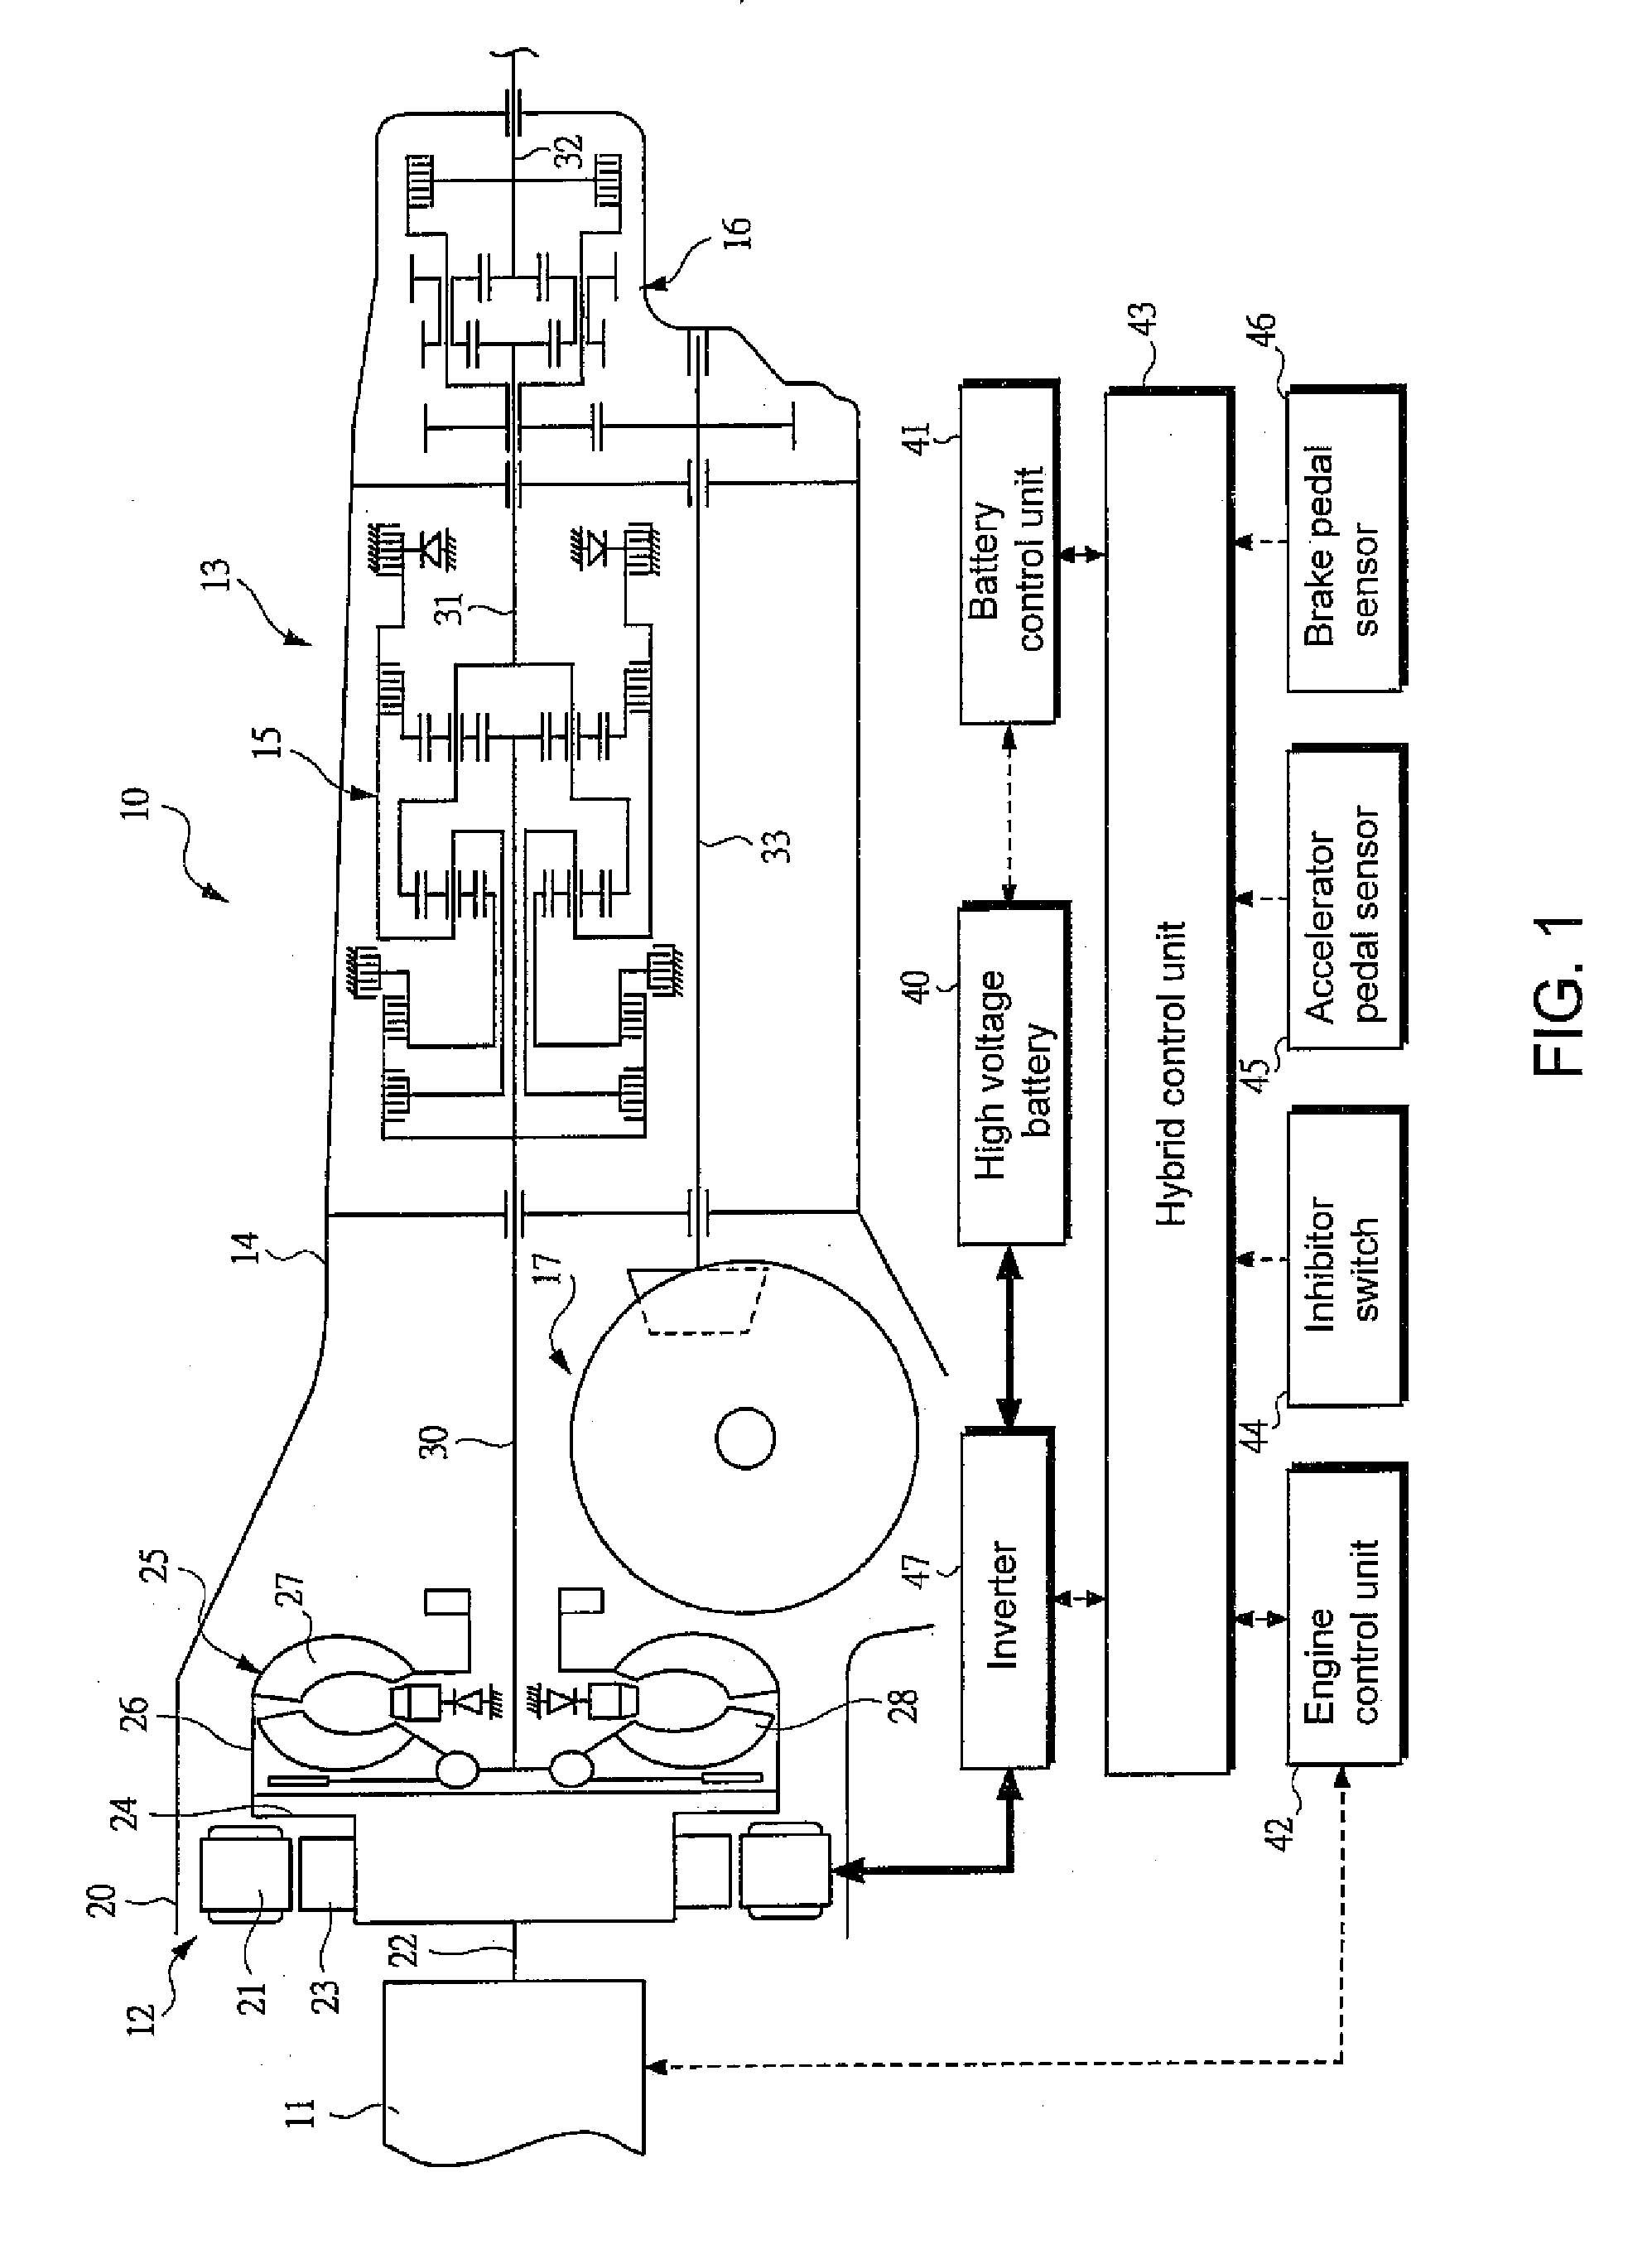 Diagnostic control device for a hybrid vehicle